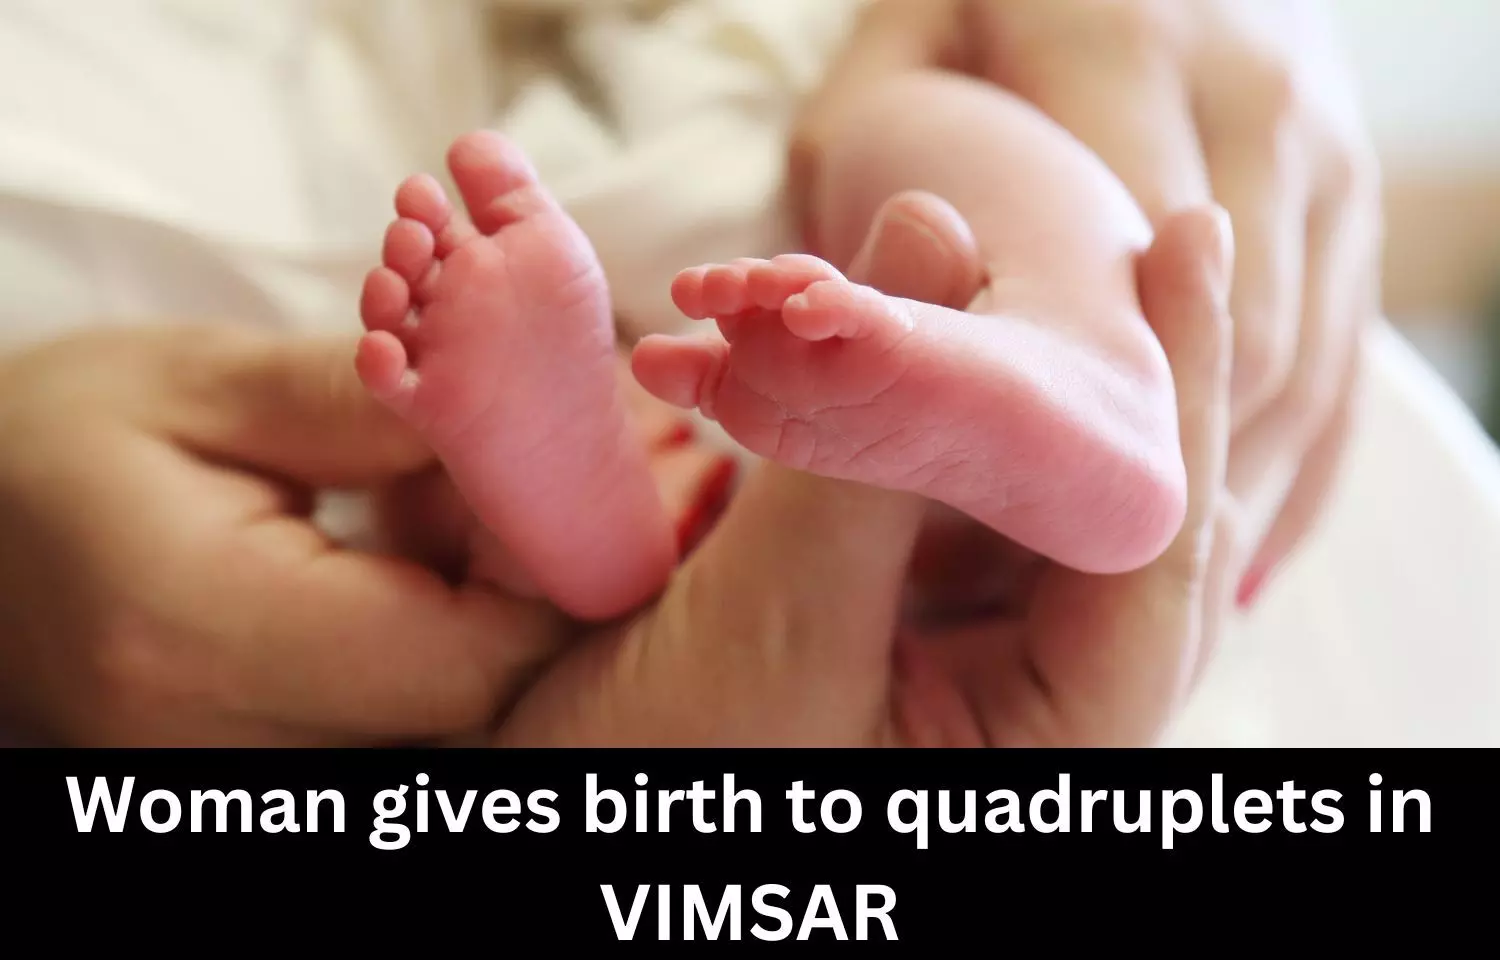 21-year-old woman gives birth to quadruplets in VIMSAR